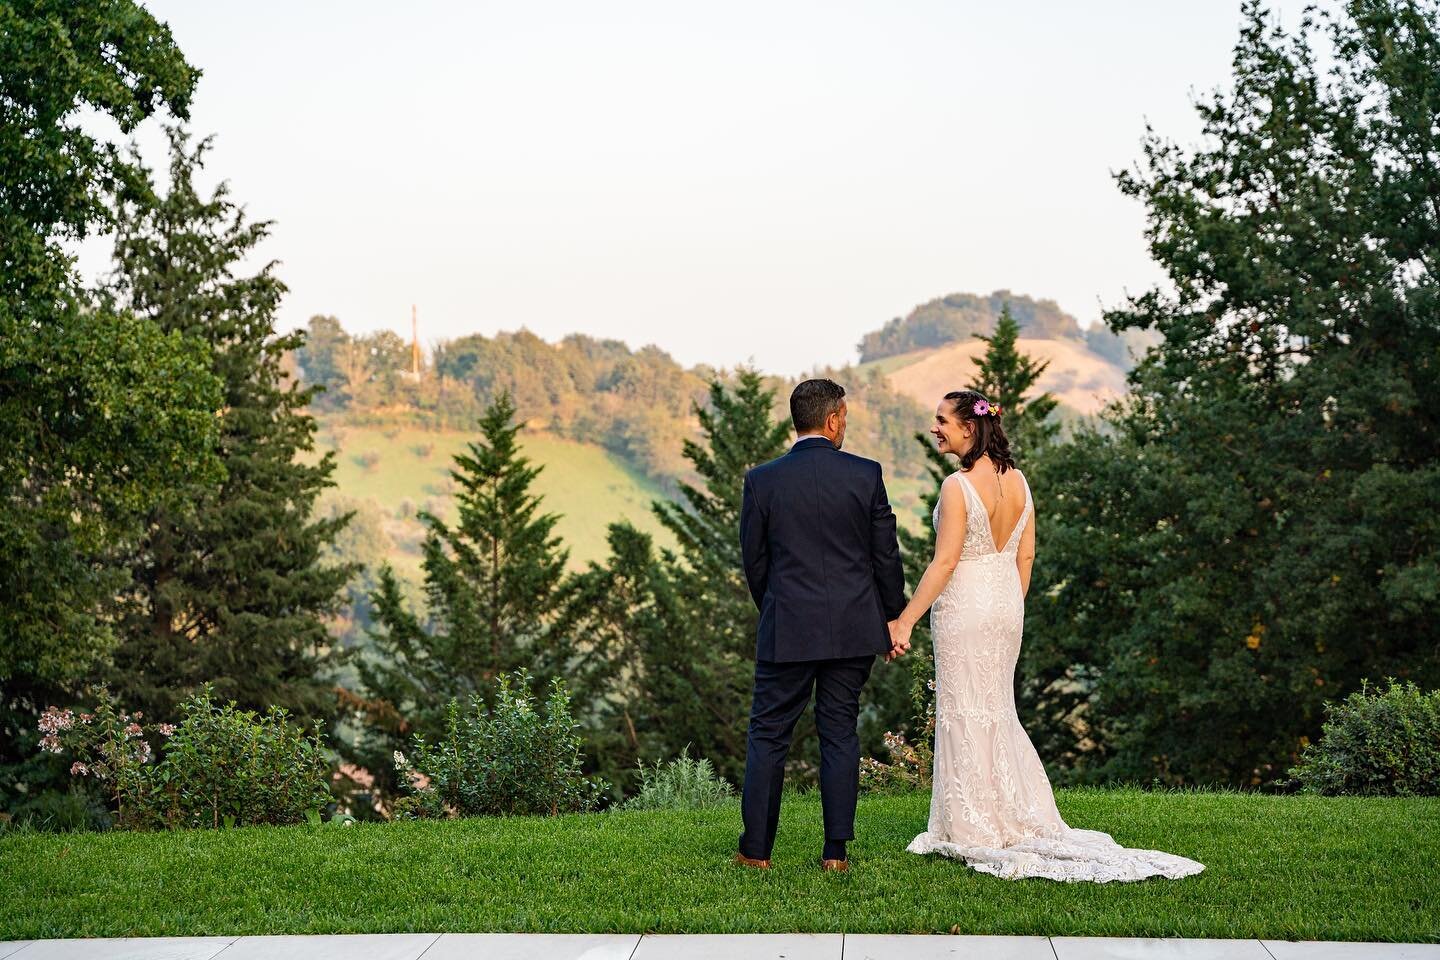 We&rsquo;re on a bit of a countdown here and @situcafe to our exciting new launch which we will announce very soon!
&bull;
In the meantime, here&rsquo;s a throwback to Ange and Jim&rsquo;s stunning Italy wedding in the autumn.
&bull;
&bull;
&bull;
&b